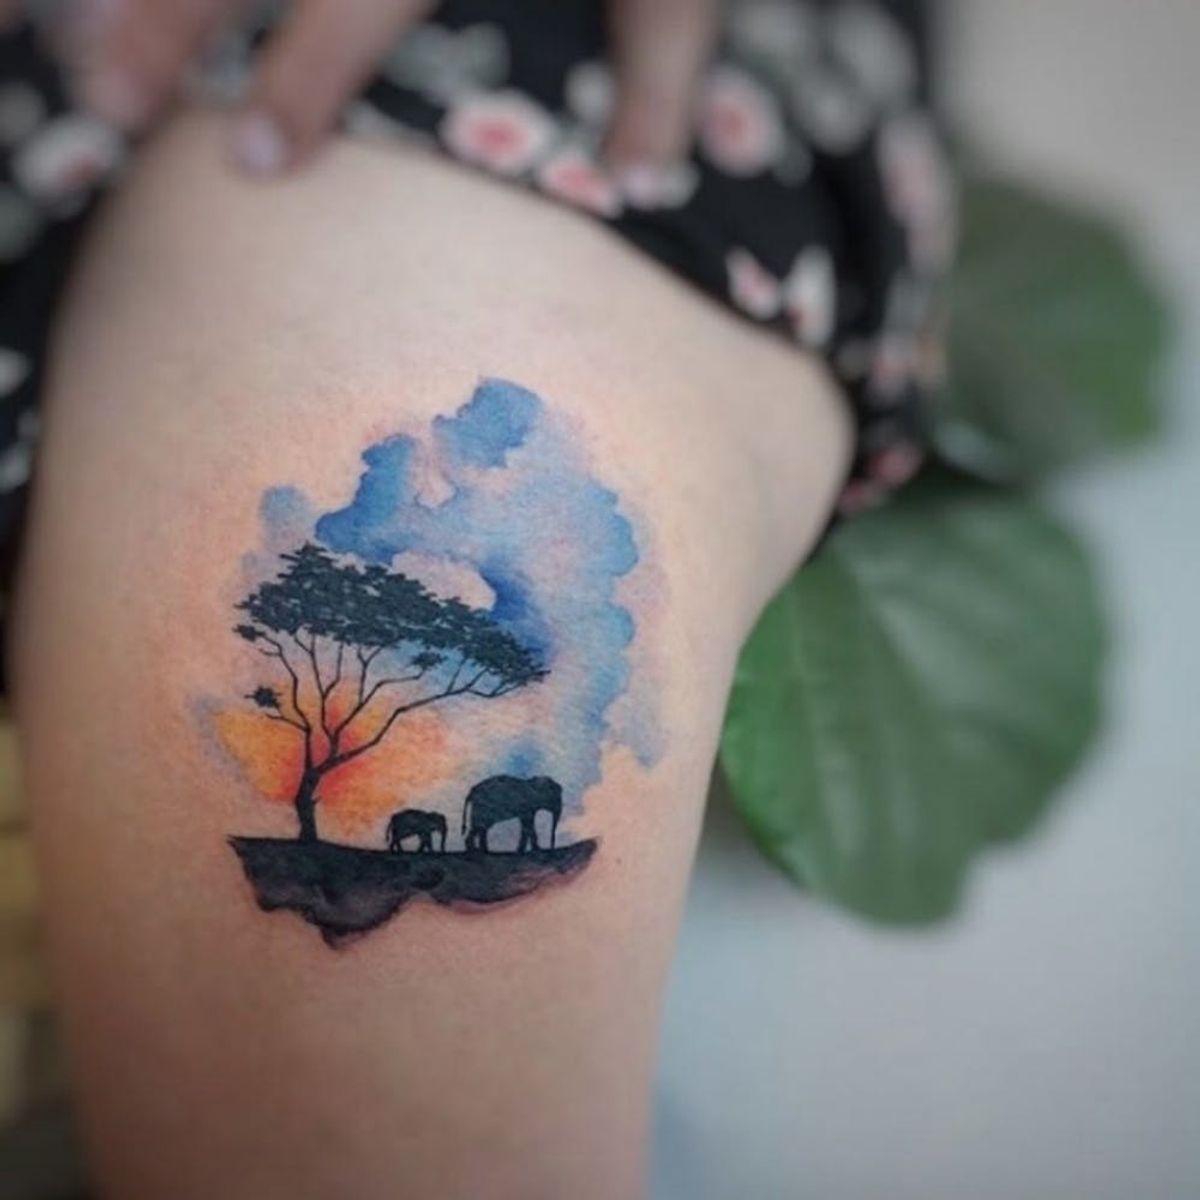 9 Watercolor Tattoos That Will Inspire You to Take the Plunge